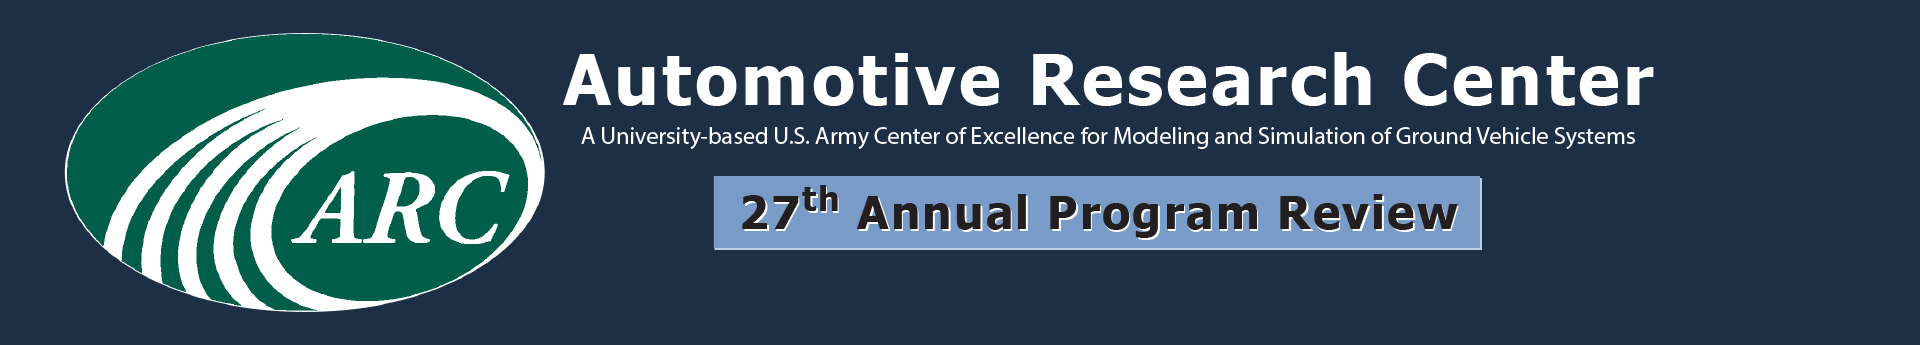 The banner to welcome you to Automotive Research Center (ARC)